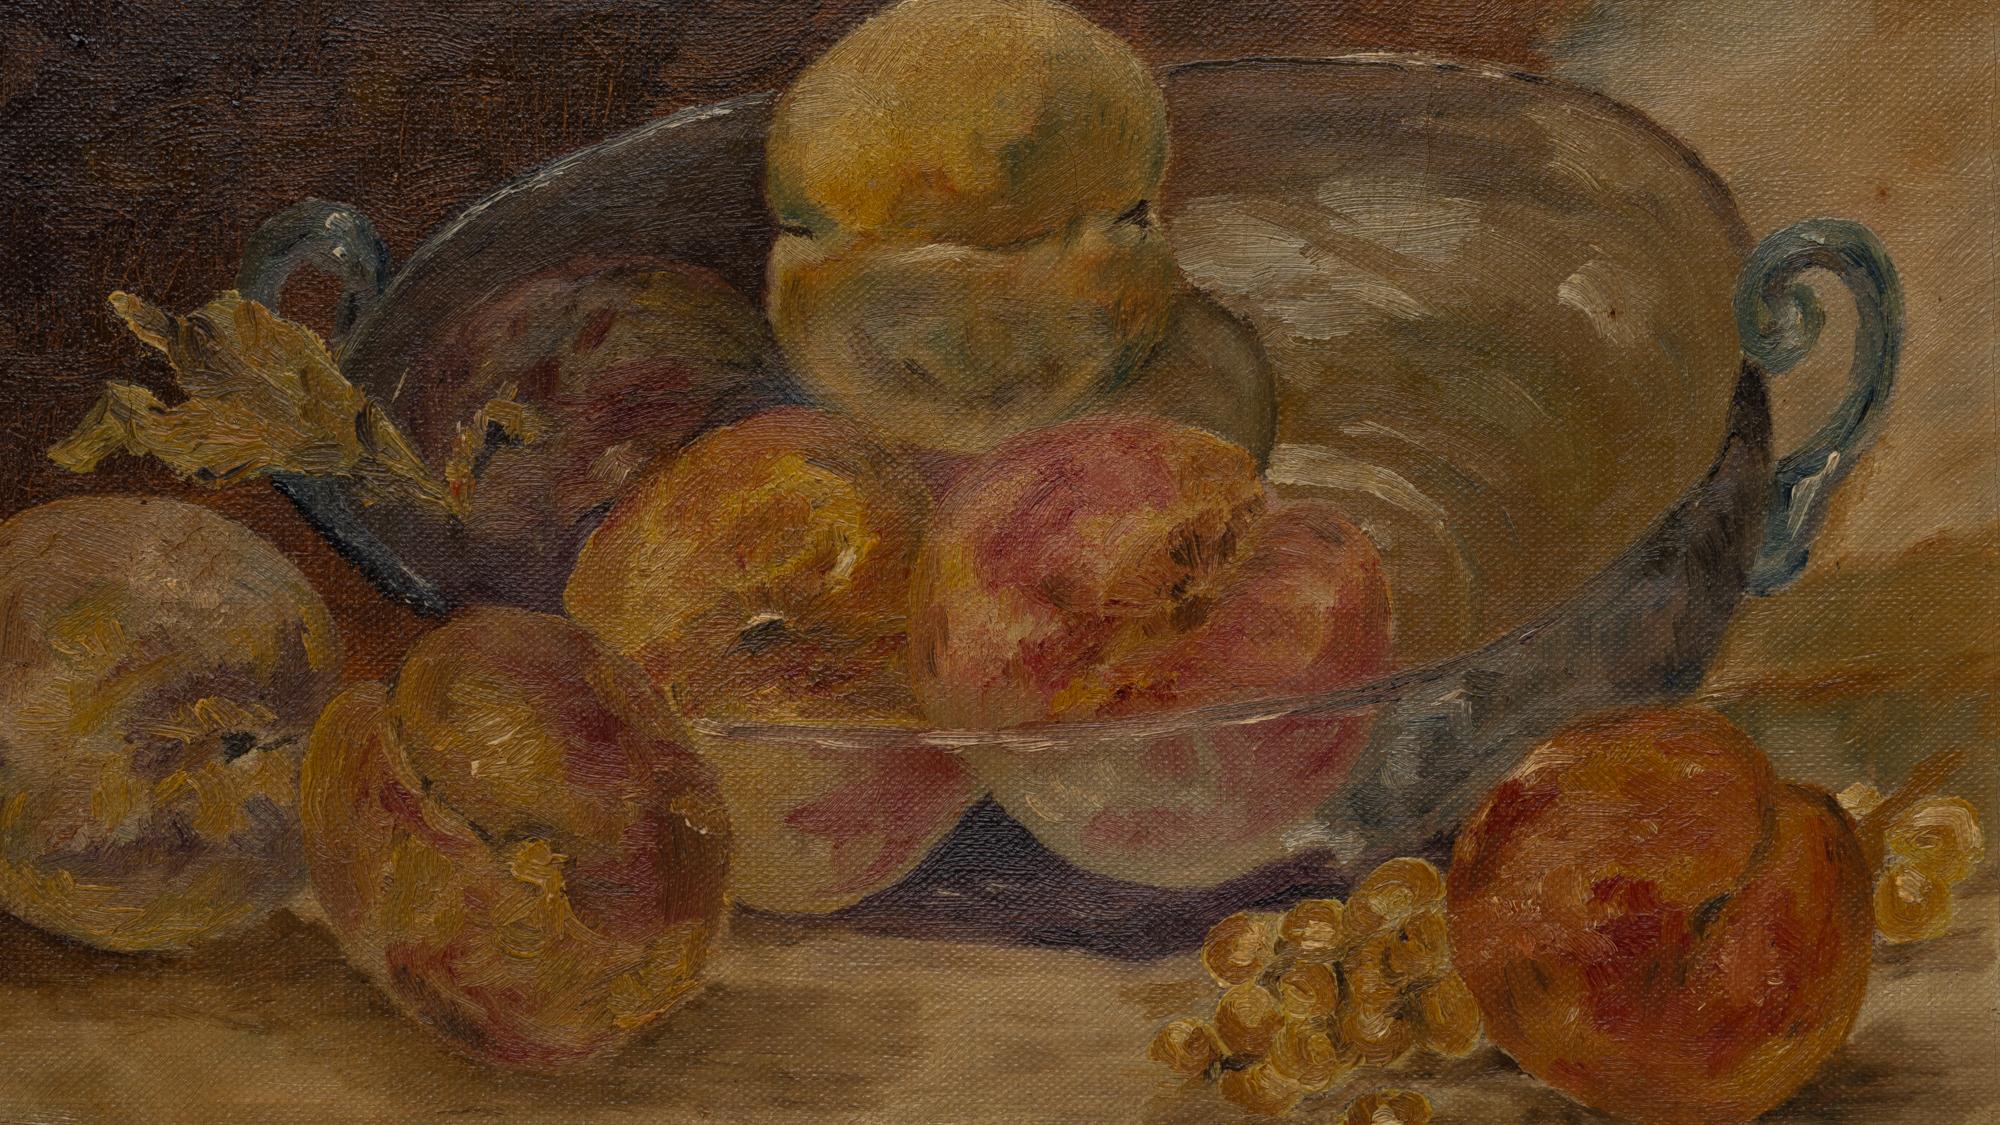 This vibrant 20th Century Belgian Painting is a still life that celebrates the richness of the harvest. The canvas is alive with the sumptuous colors of ripe fruit, artfully arranged to draw the eye across the bountiful display. The painter's skill